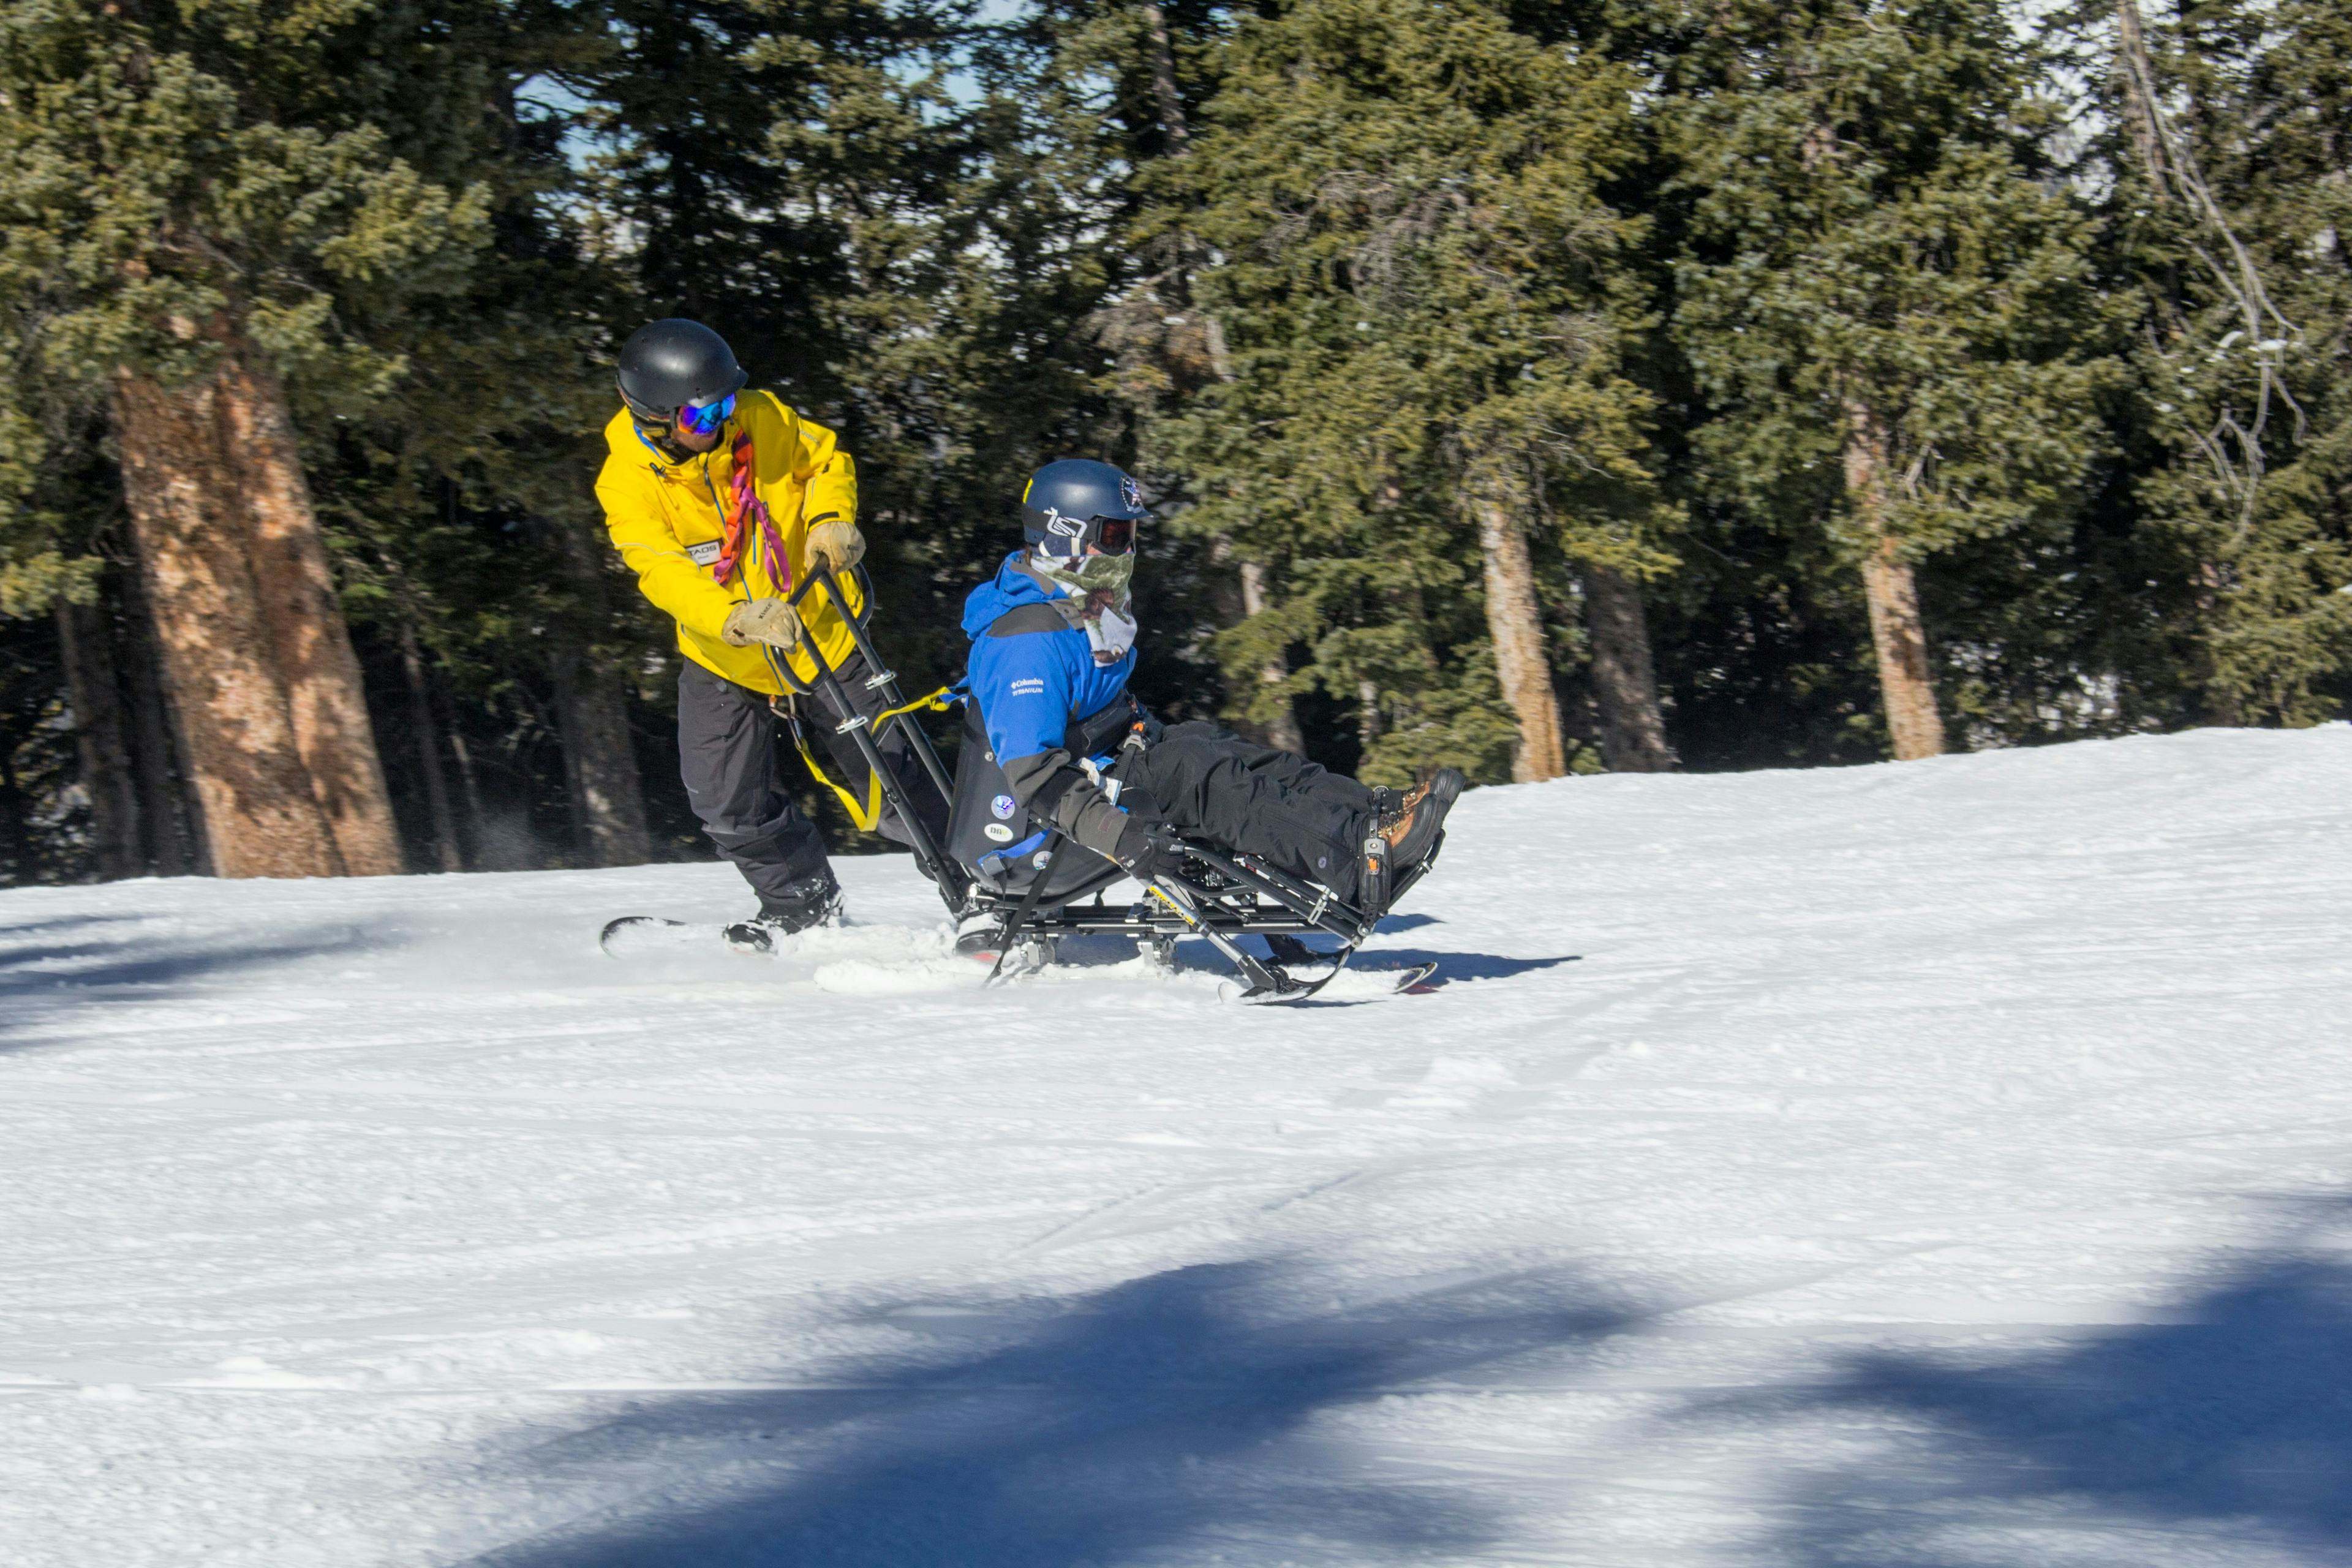 Adaptive skier on a ski chair heads down the mountain with the help of a snow sports instructor